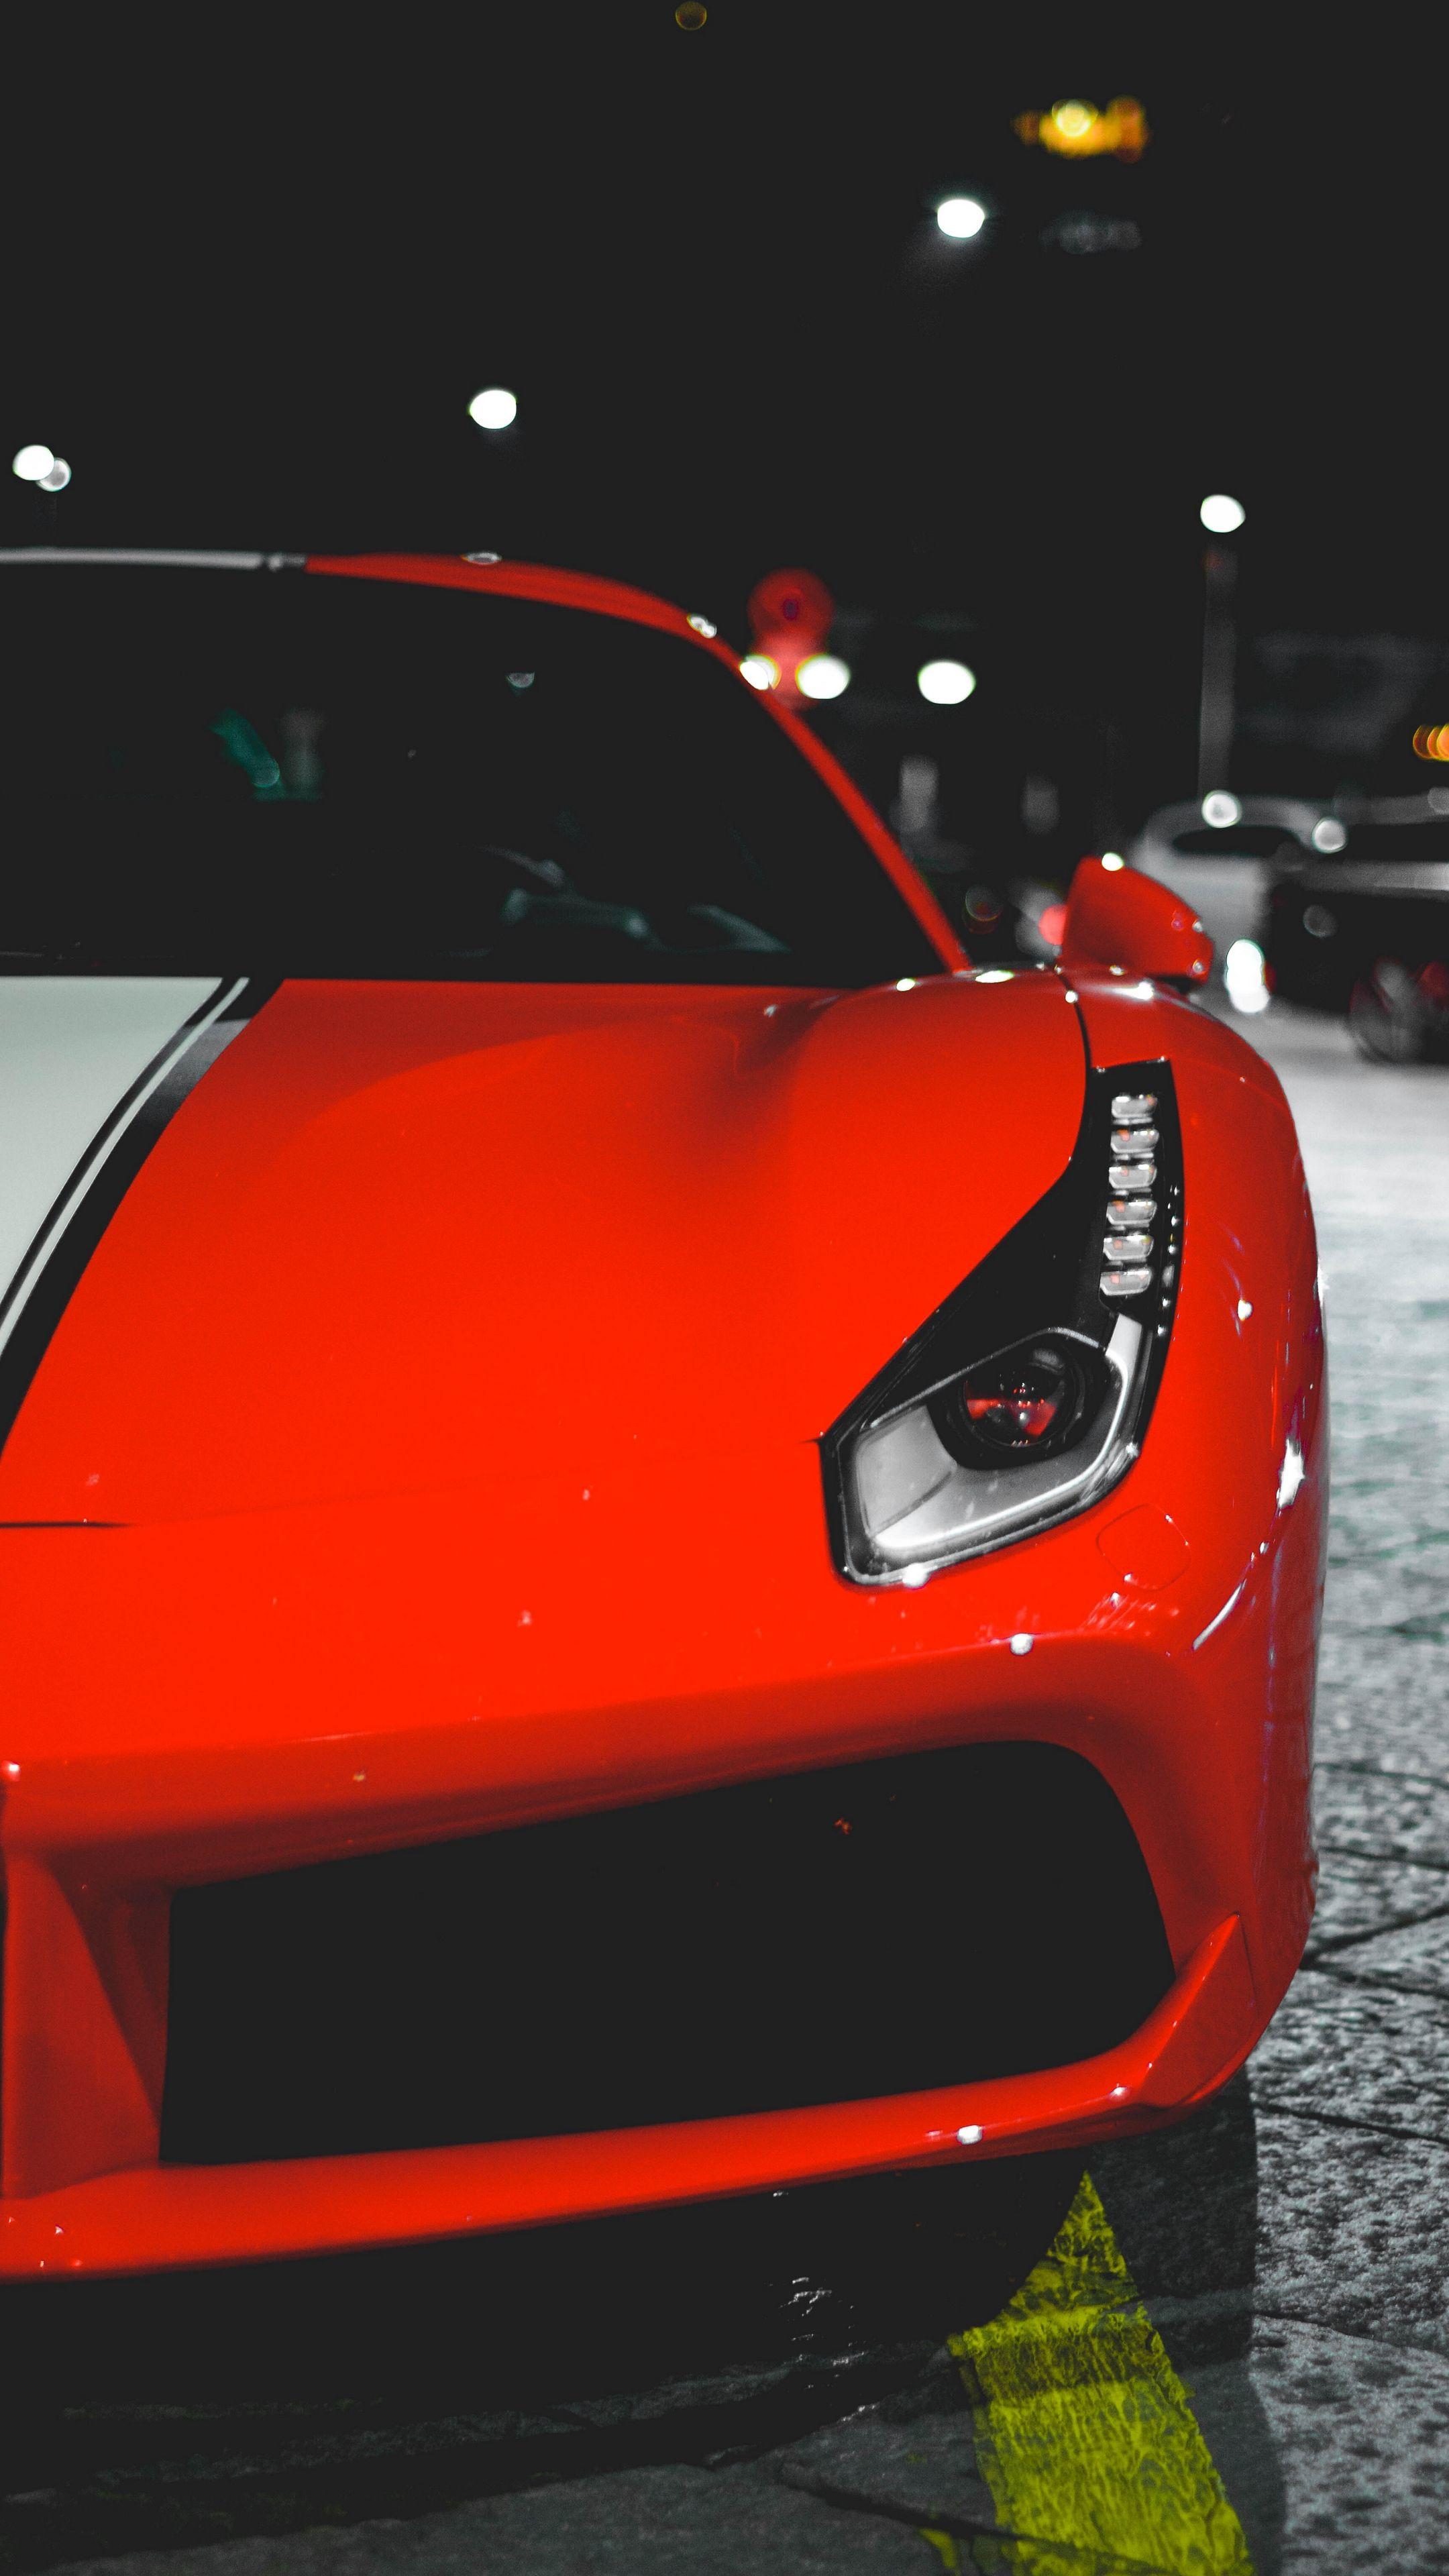 Cars #auto #frontview #red #wallpaper HD 4k background for android :). Car hd, Sports car wallpaper, HD wallpaper of cars